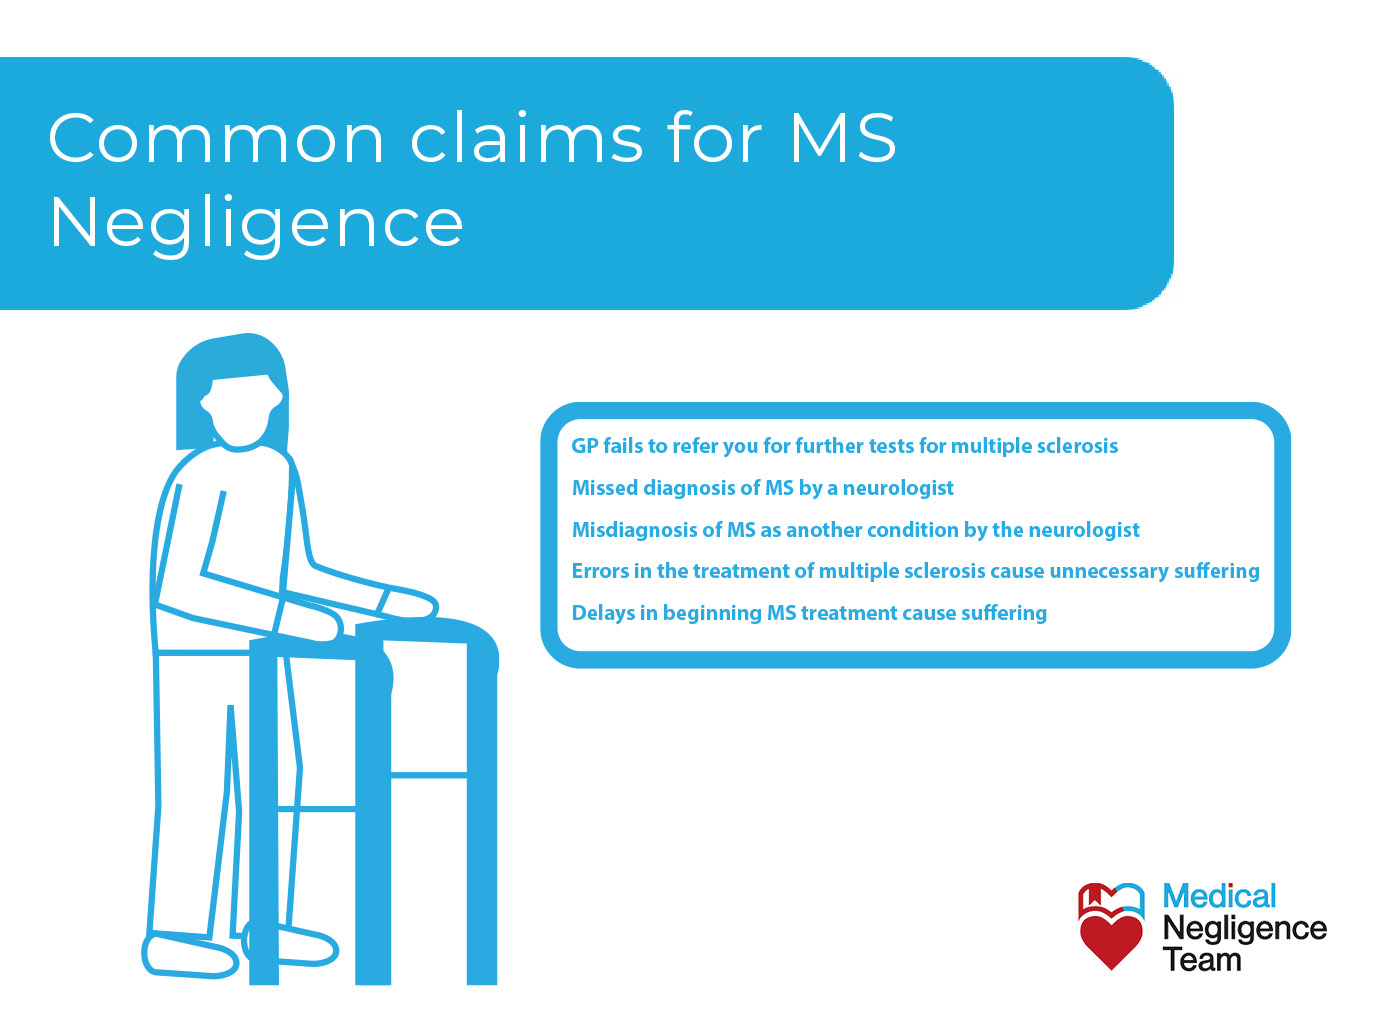 Common claims for MS Negligence